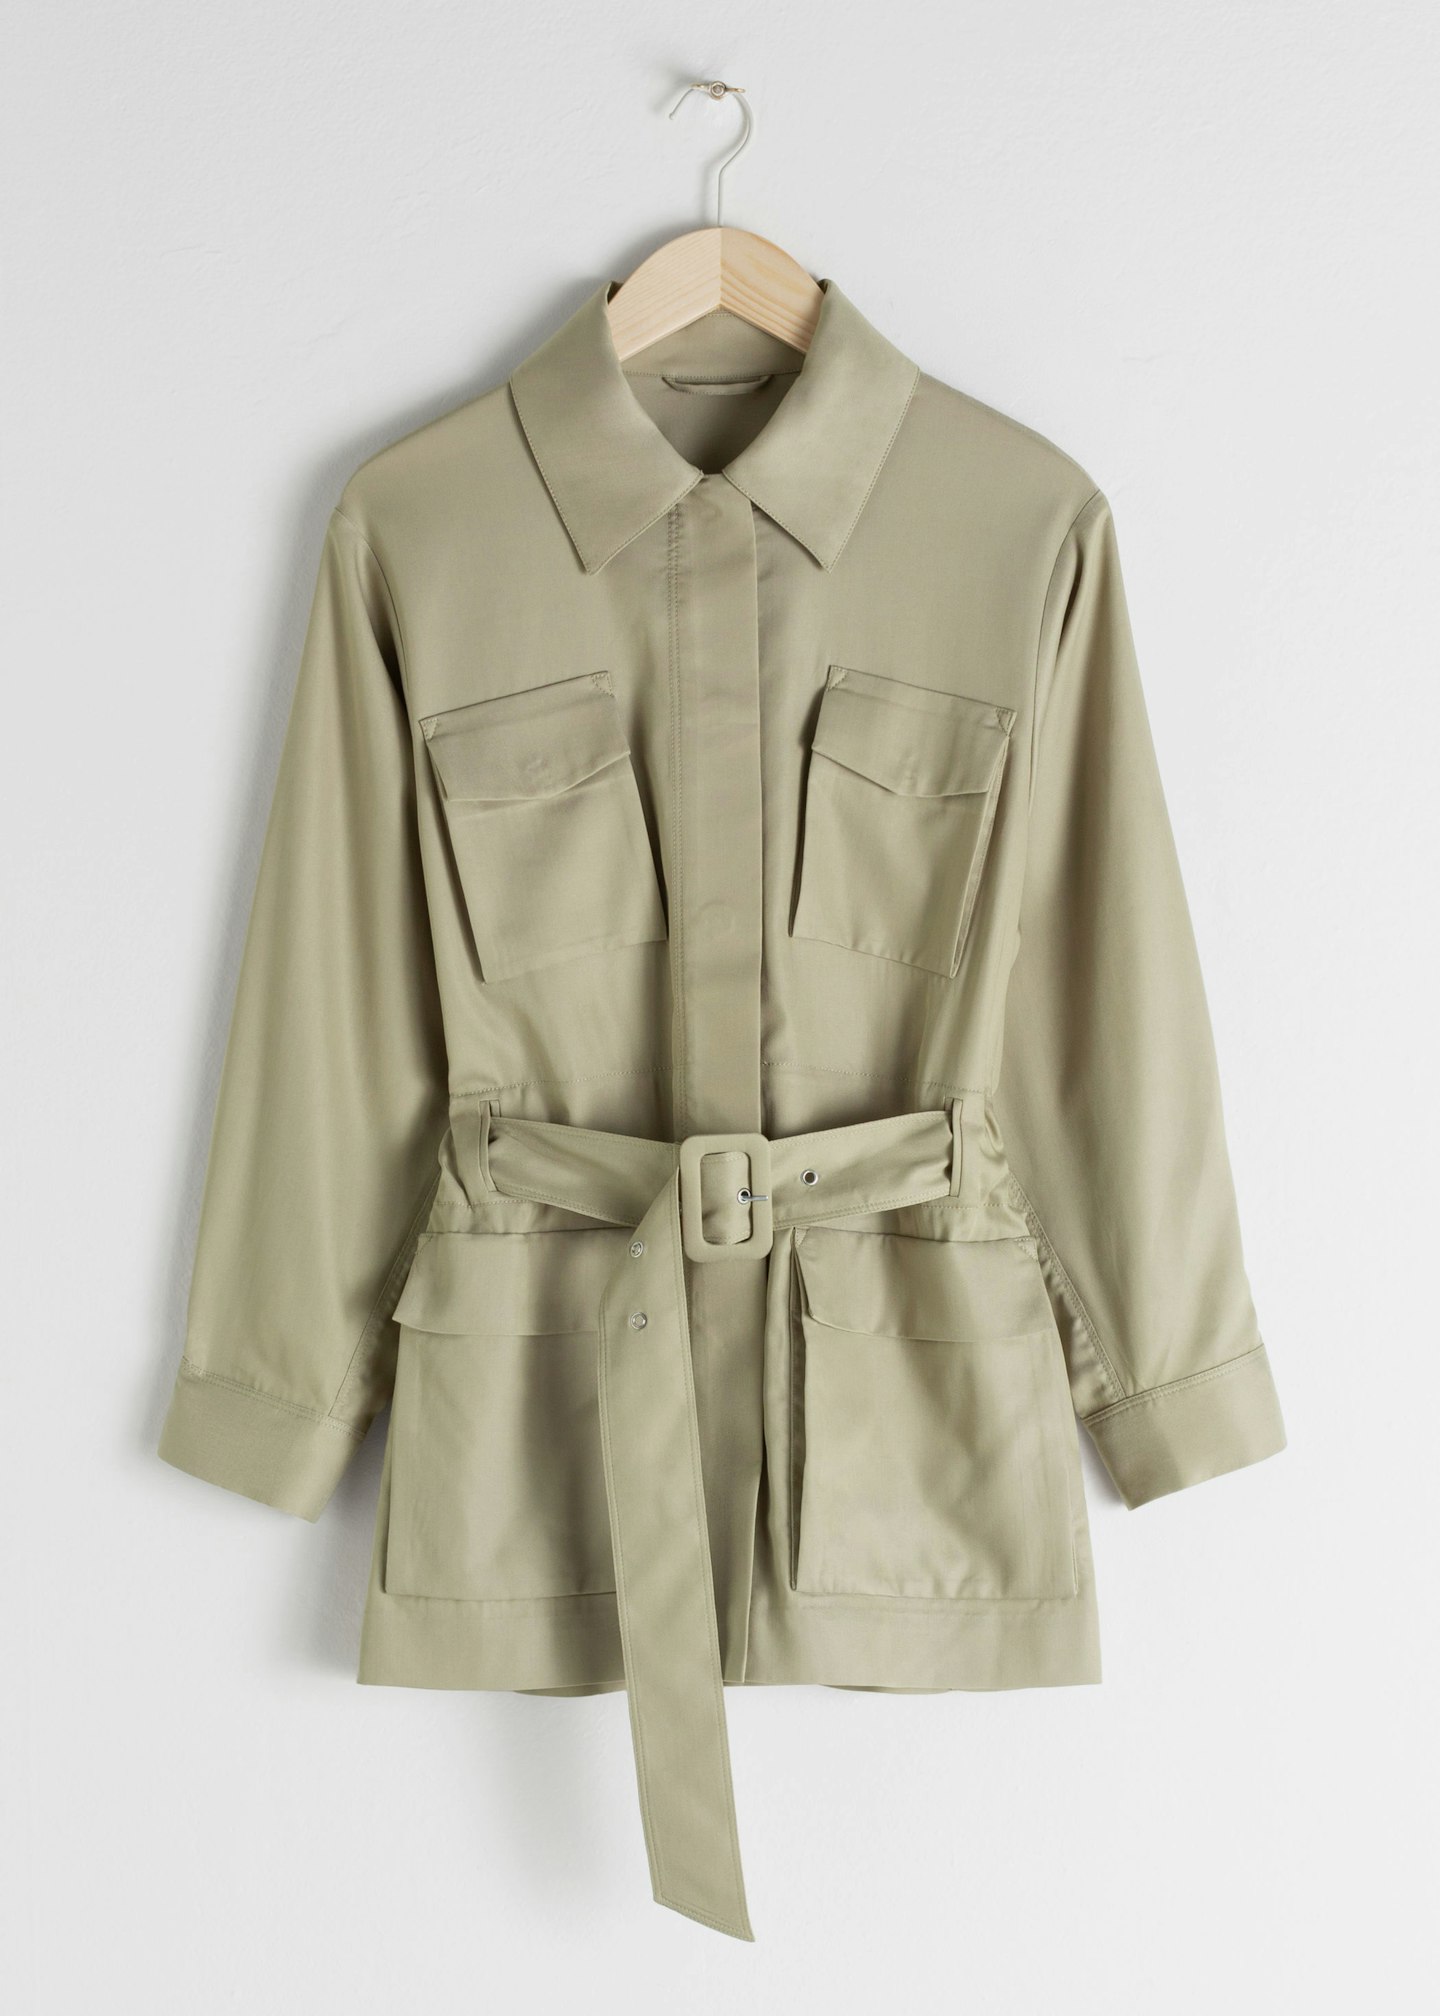 & Other Stories, Oversized Belted Jacket, £110